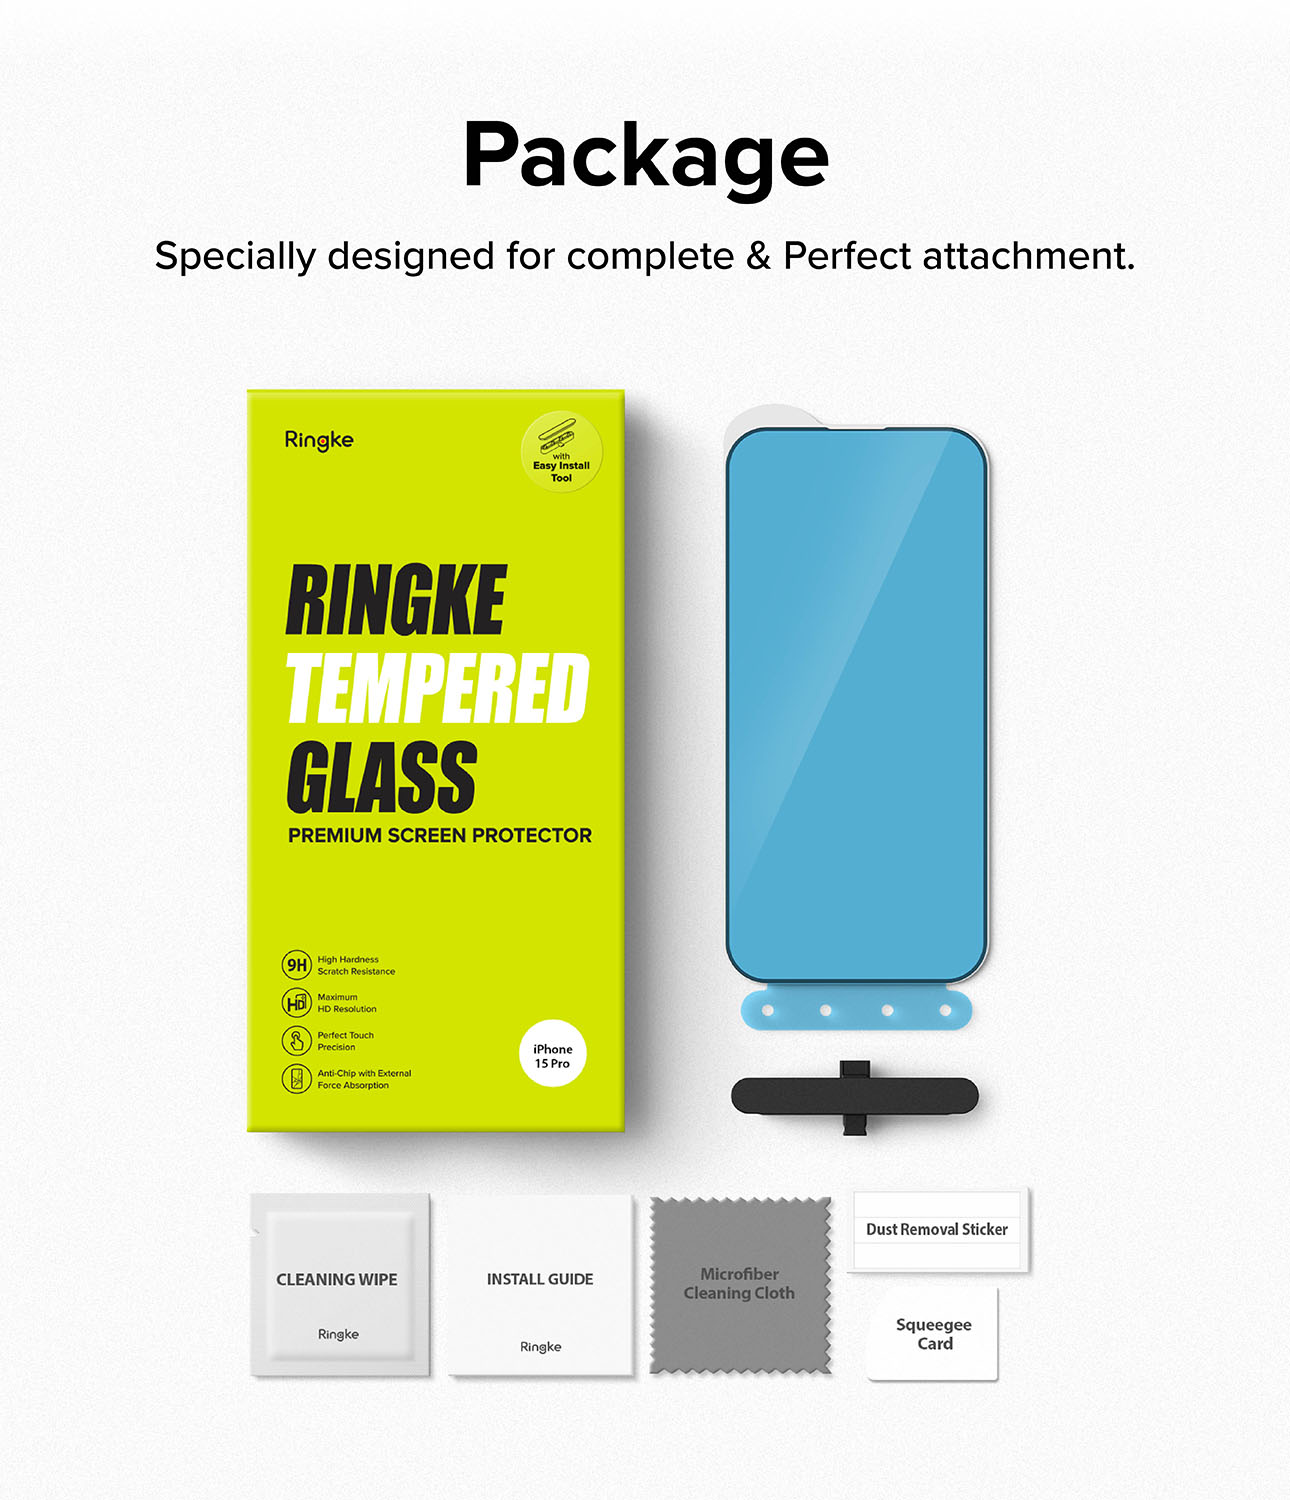 iPhone 15 Pro Screen Protector Glass